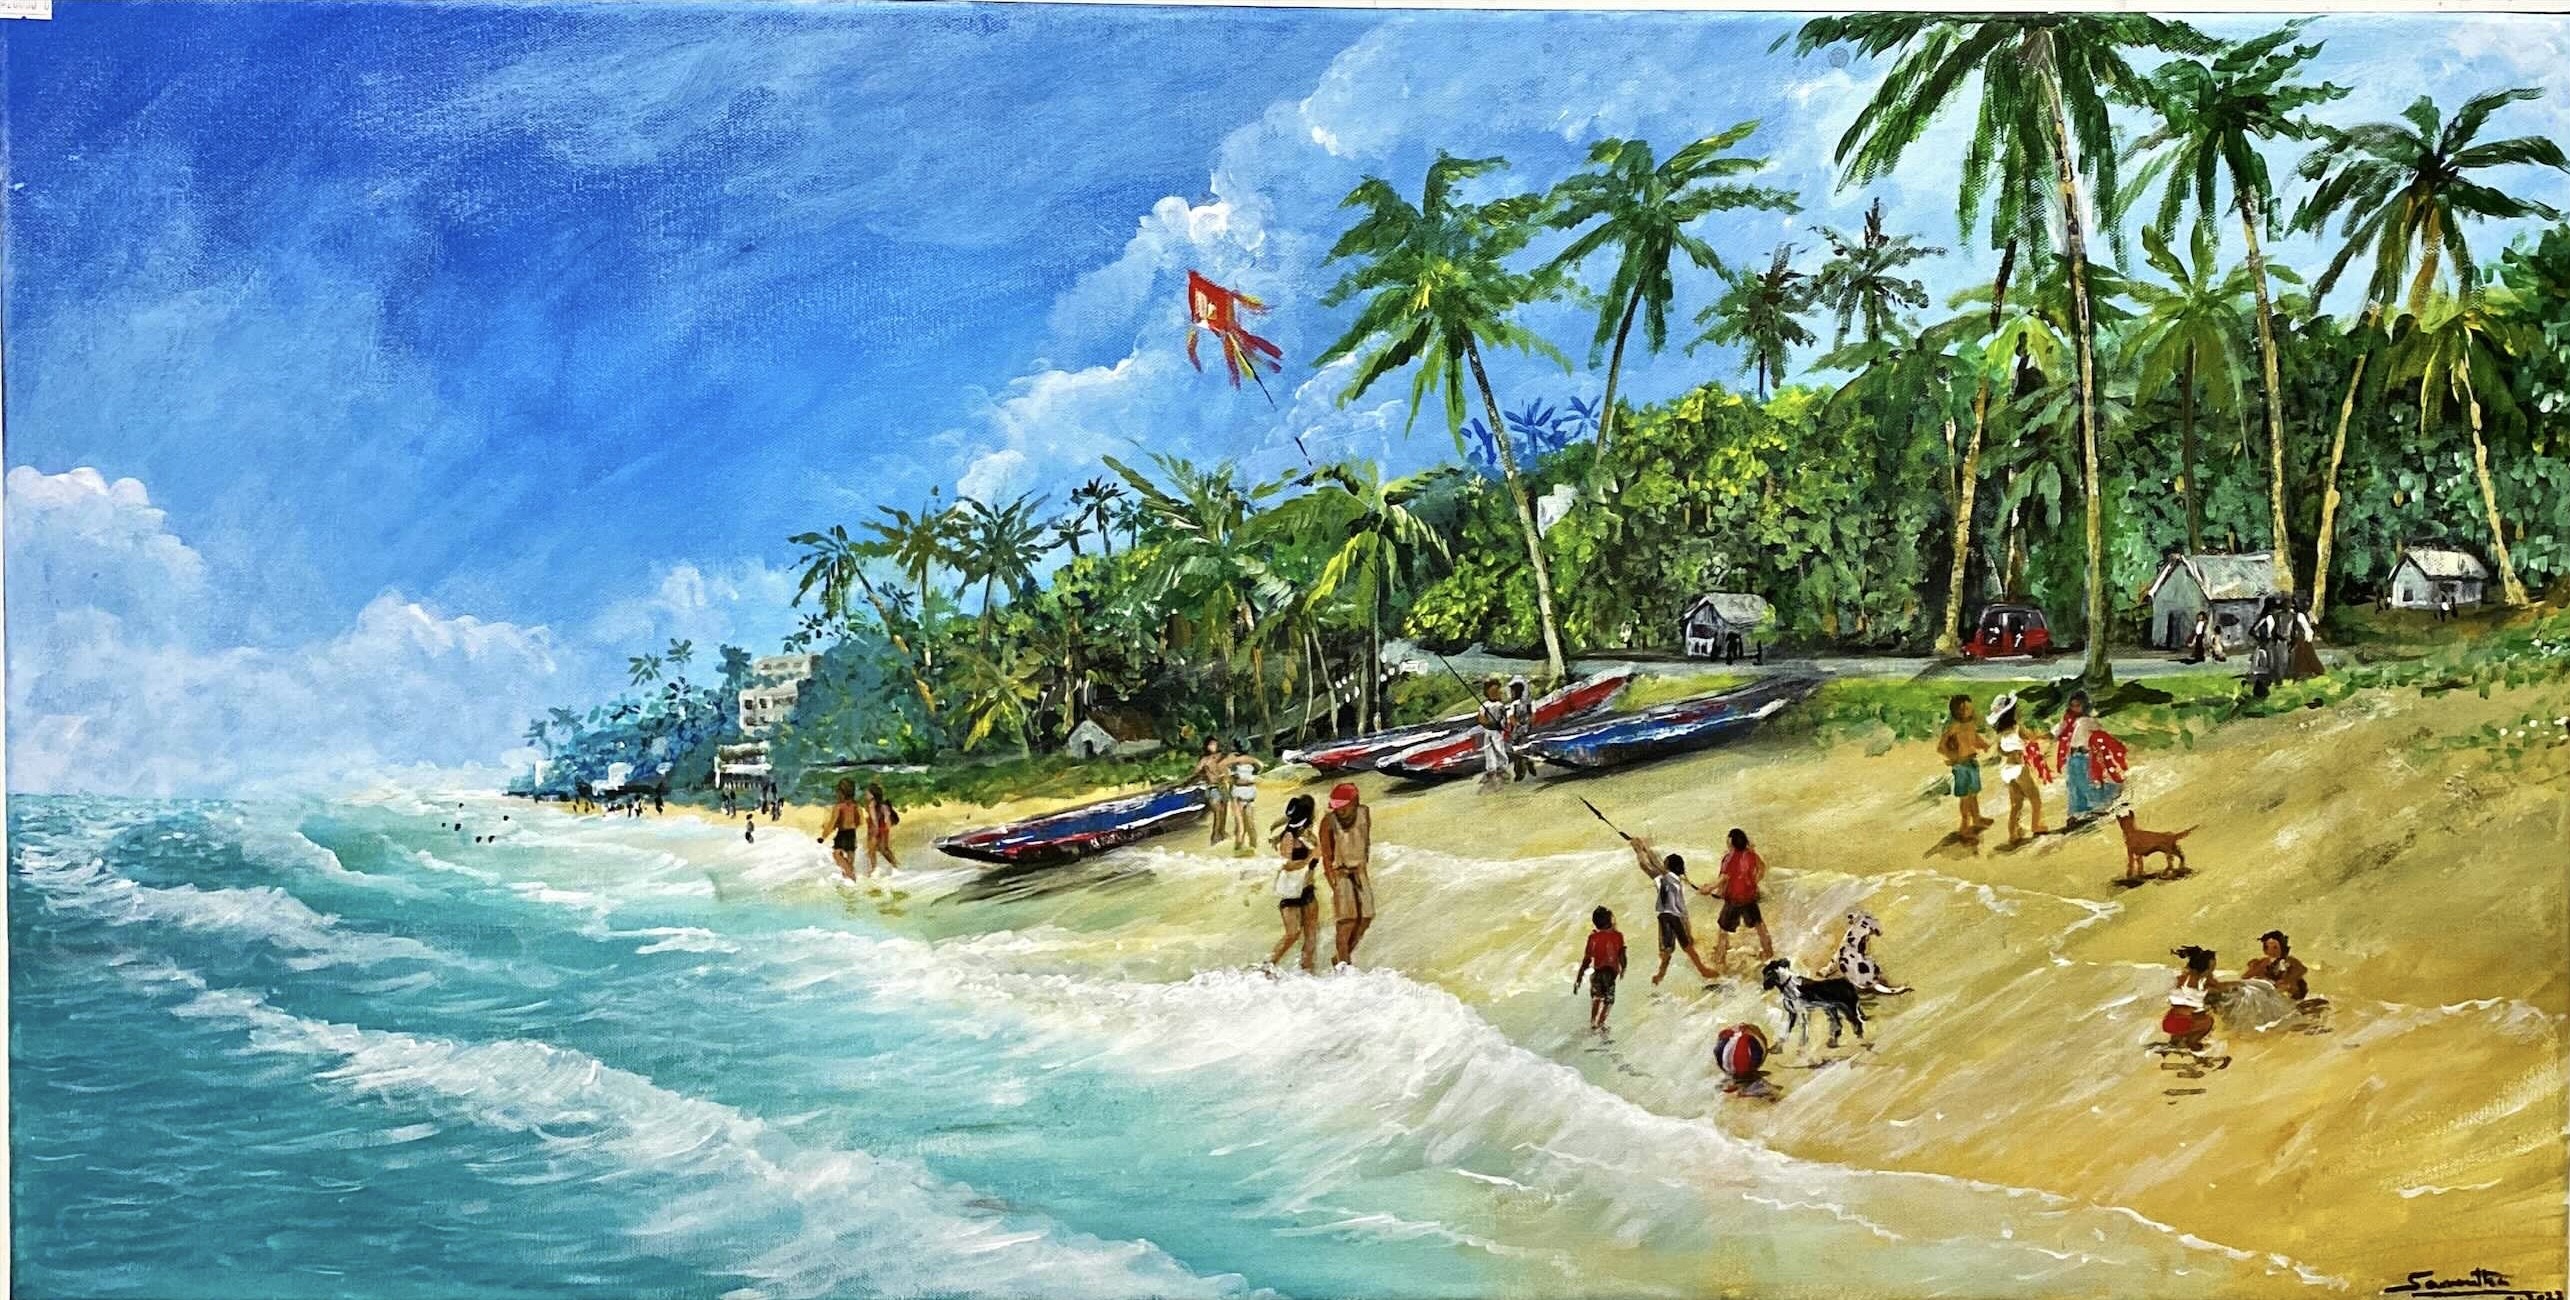 Sunny Day at beach by Samantha Wijesinghe